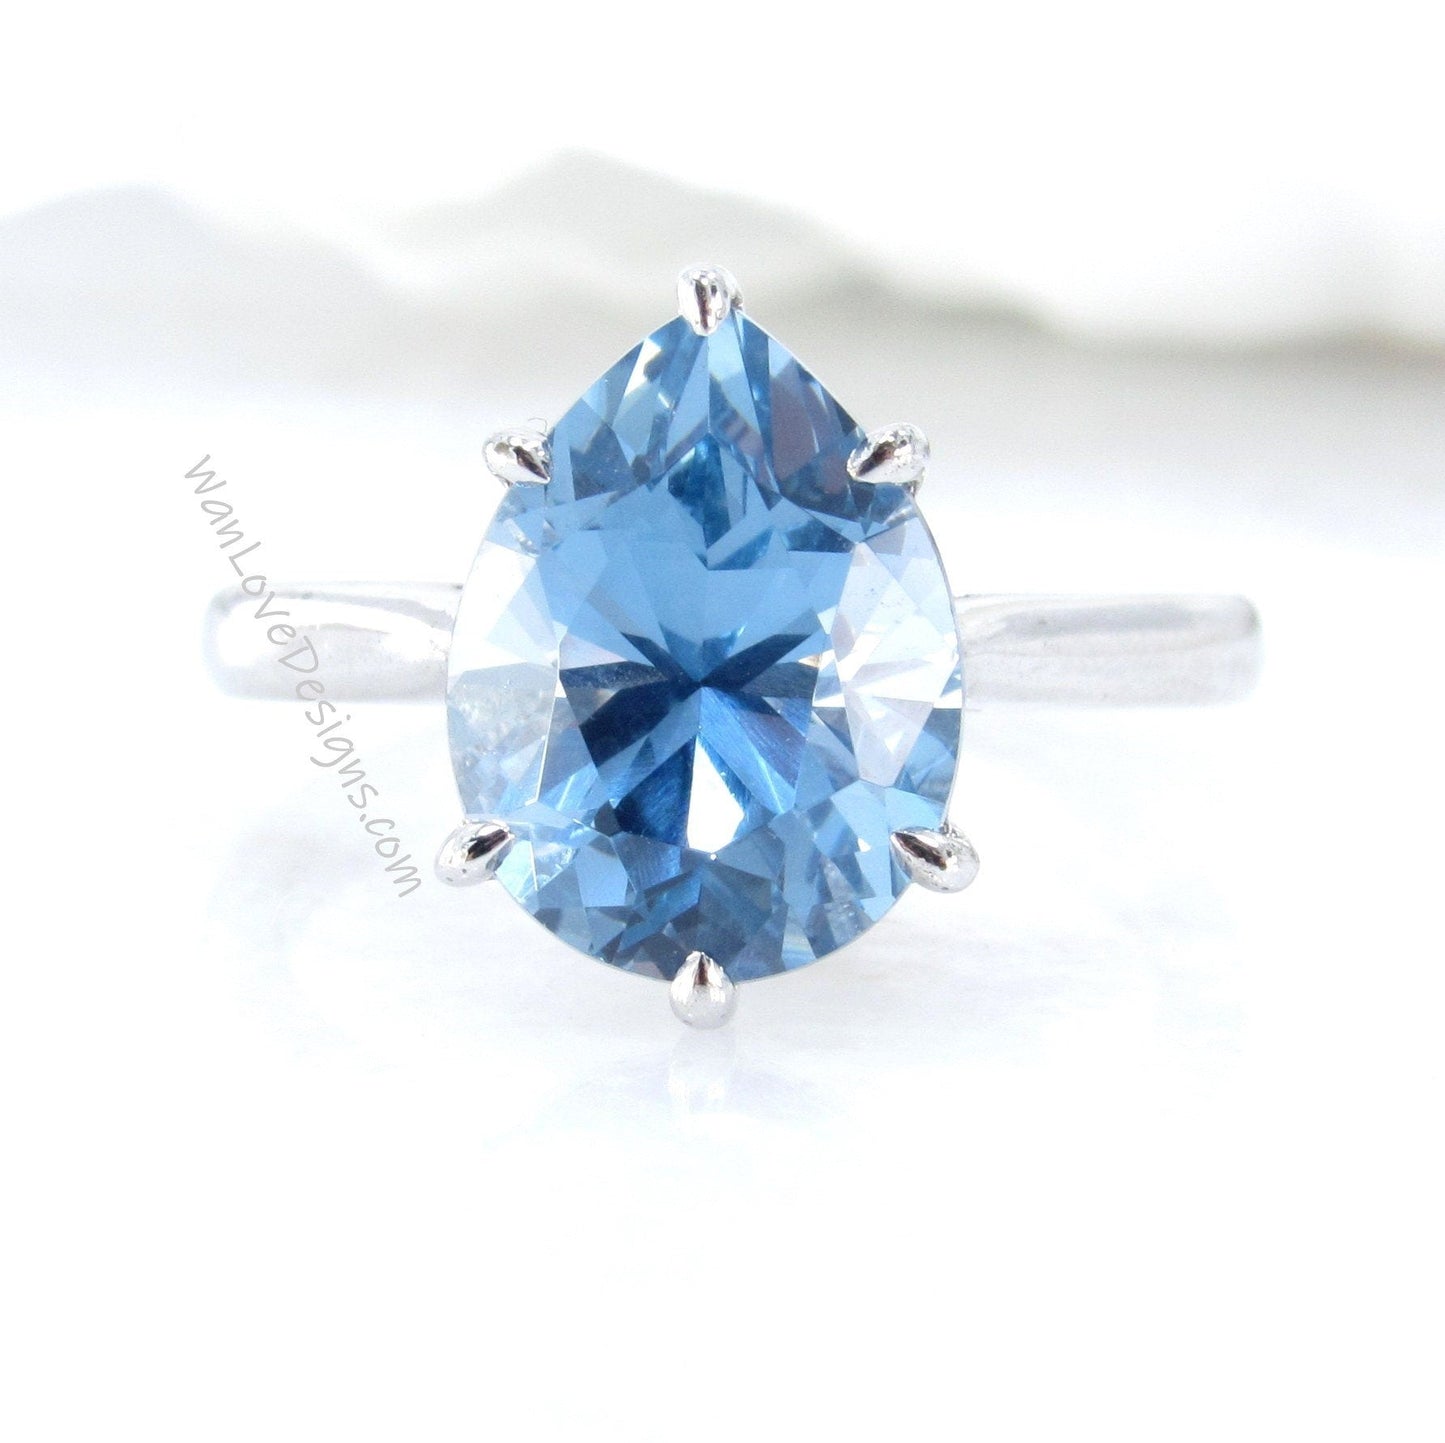 Aquamarine Blue Spinel 6 Prong Pear Solitaire Engagement Ring Cathedral 4.5ct 12x9mm Wedding Anniversary Ready to ship Wan Love Designs